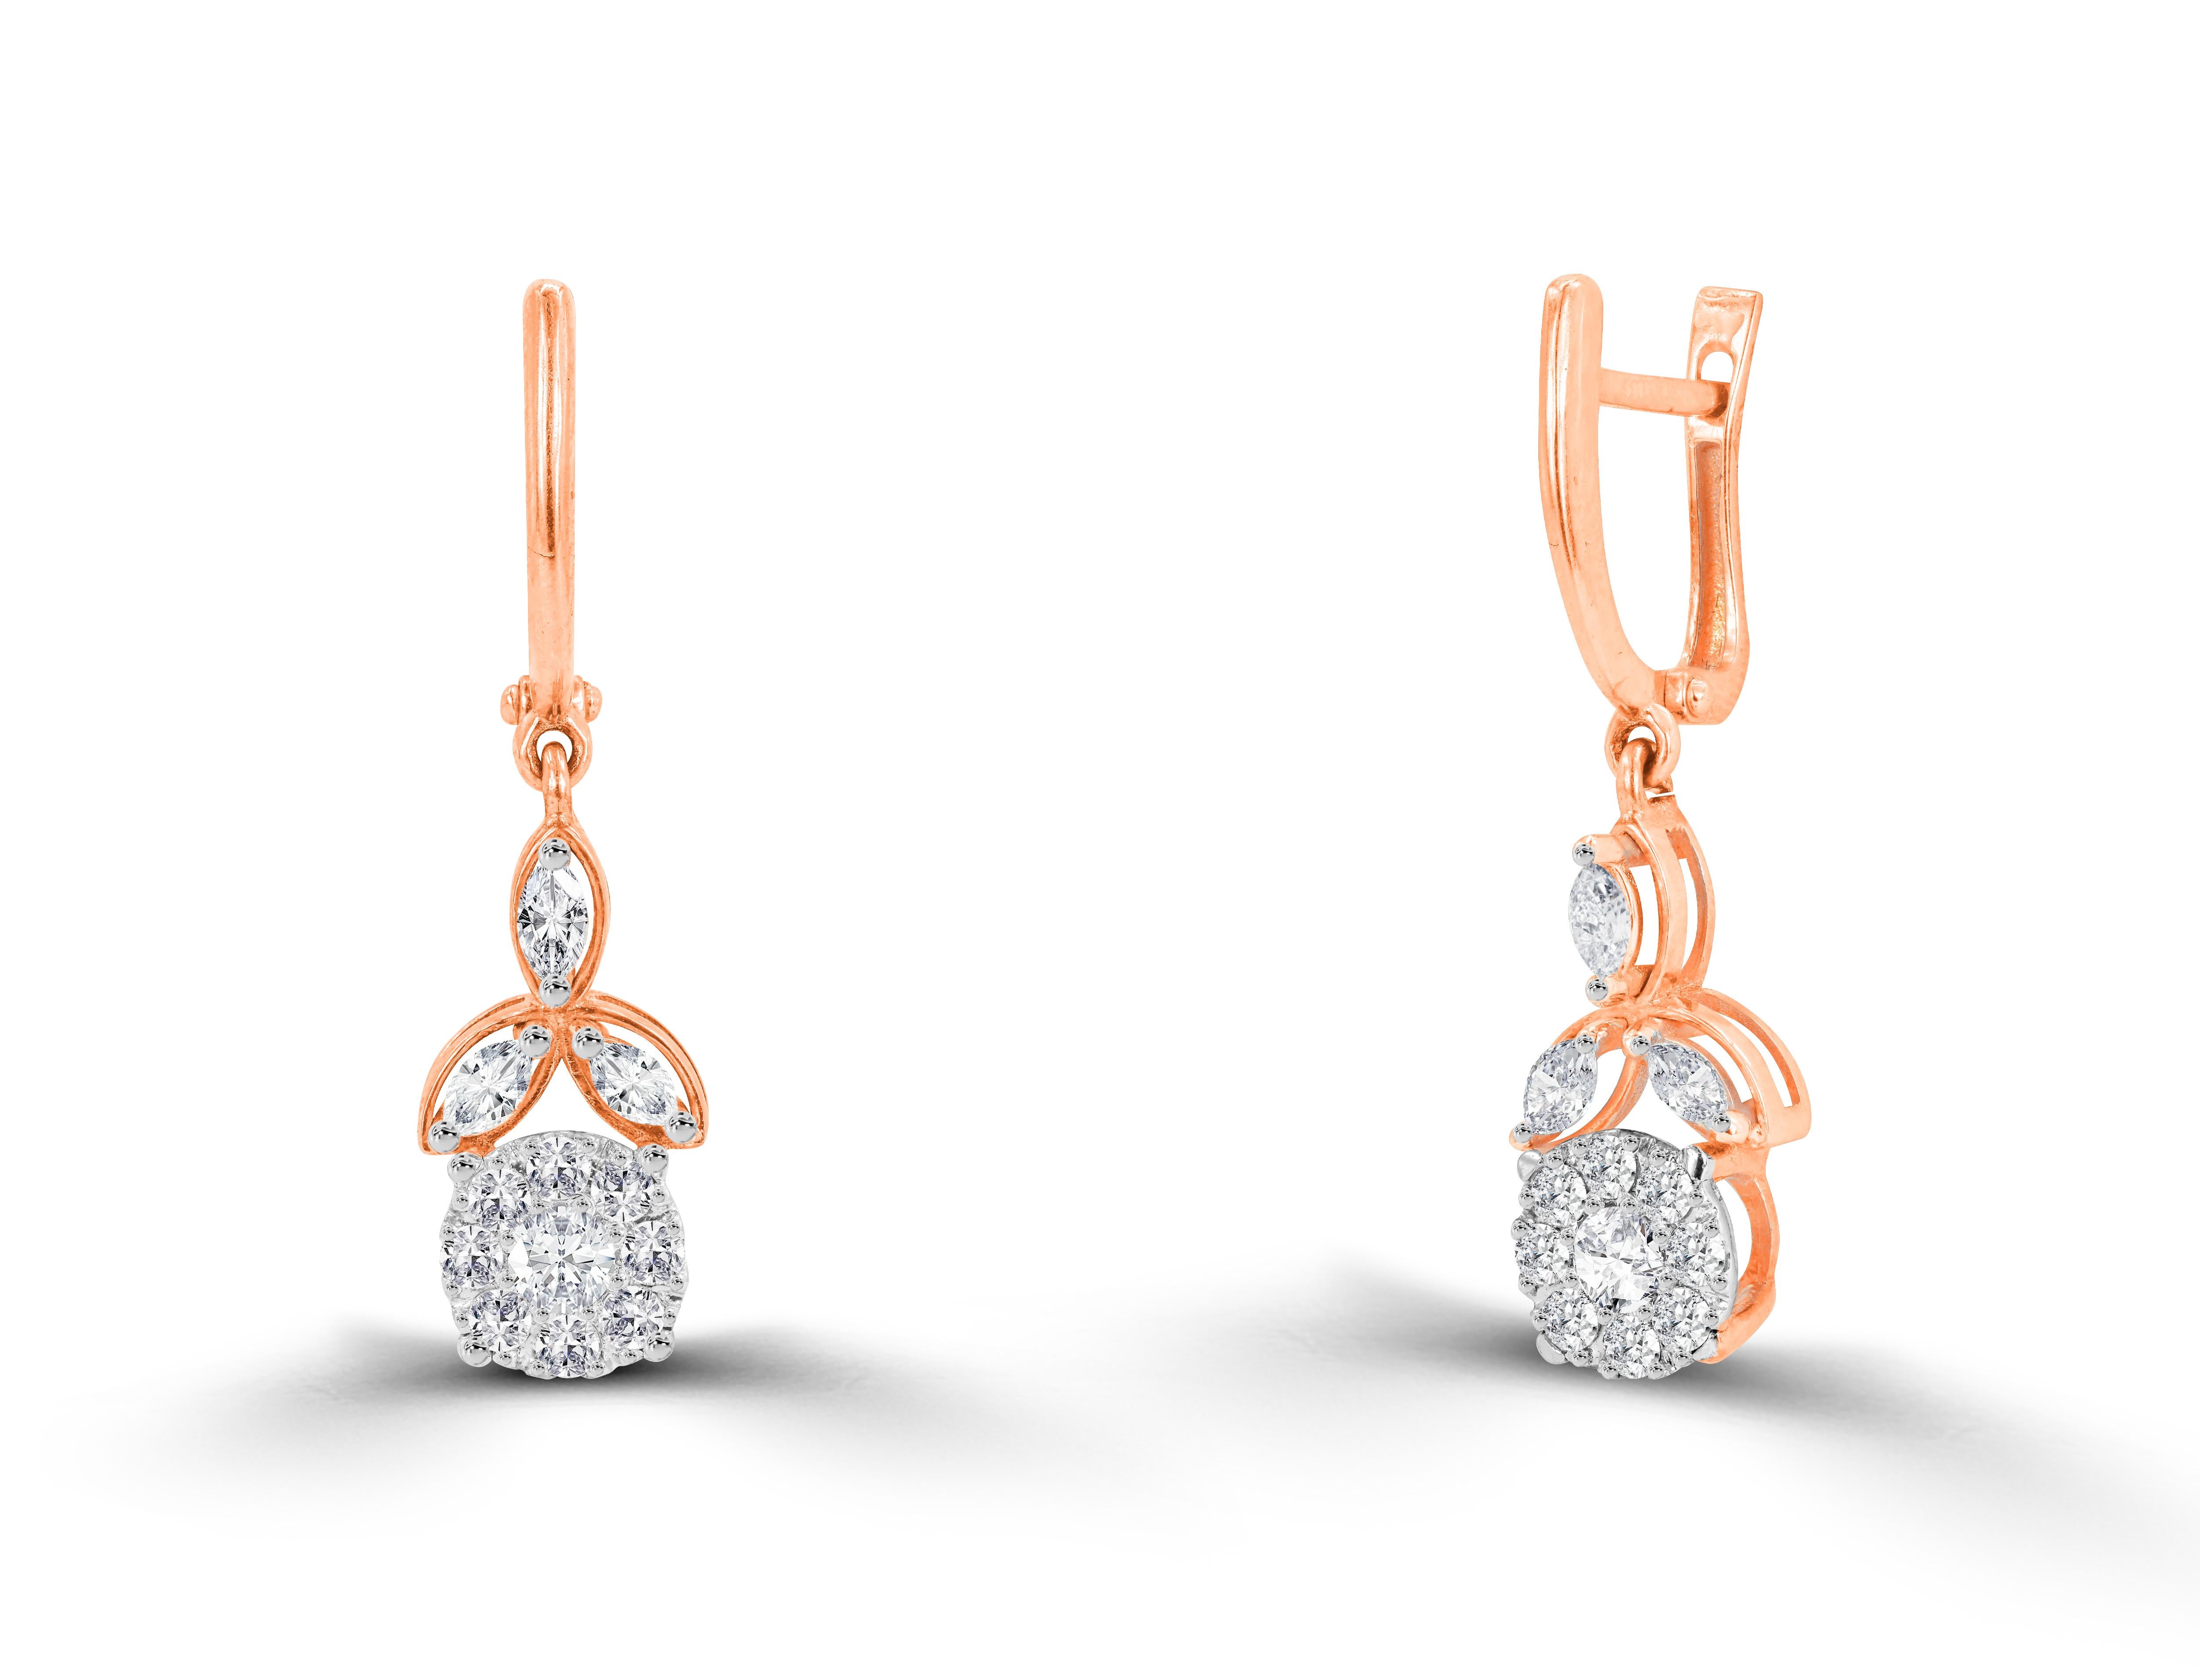 0.92 Ct Diamond Solitaire and leaf Drop Earrings in 14K Gold, Round Brilliant cut diamond earrings, Natural Diamond Earrings, Lever-Back Earrings, Heavy End Earrings.

Oshi Jewels presents to you a beautiful Earring collection with natural diamonds